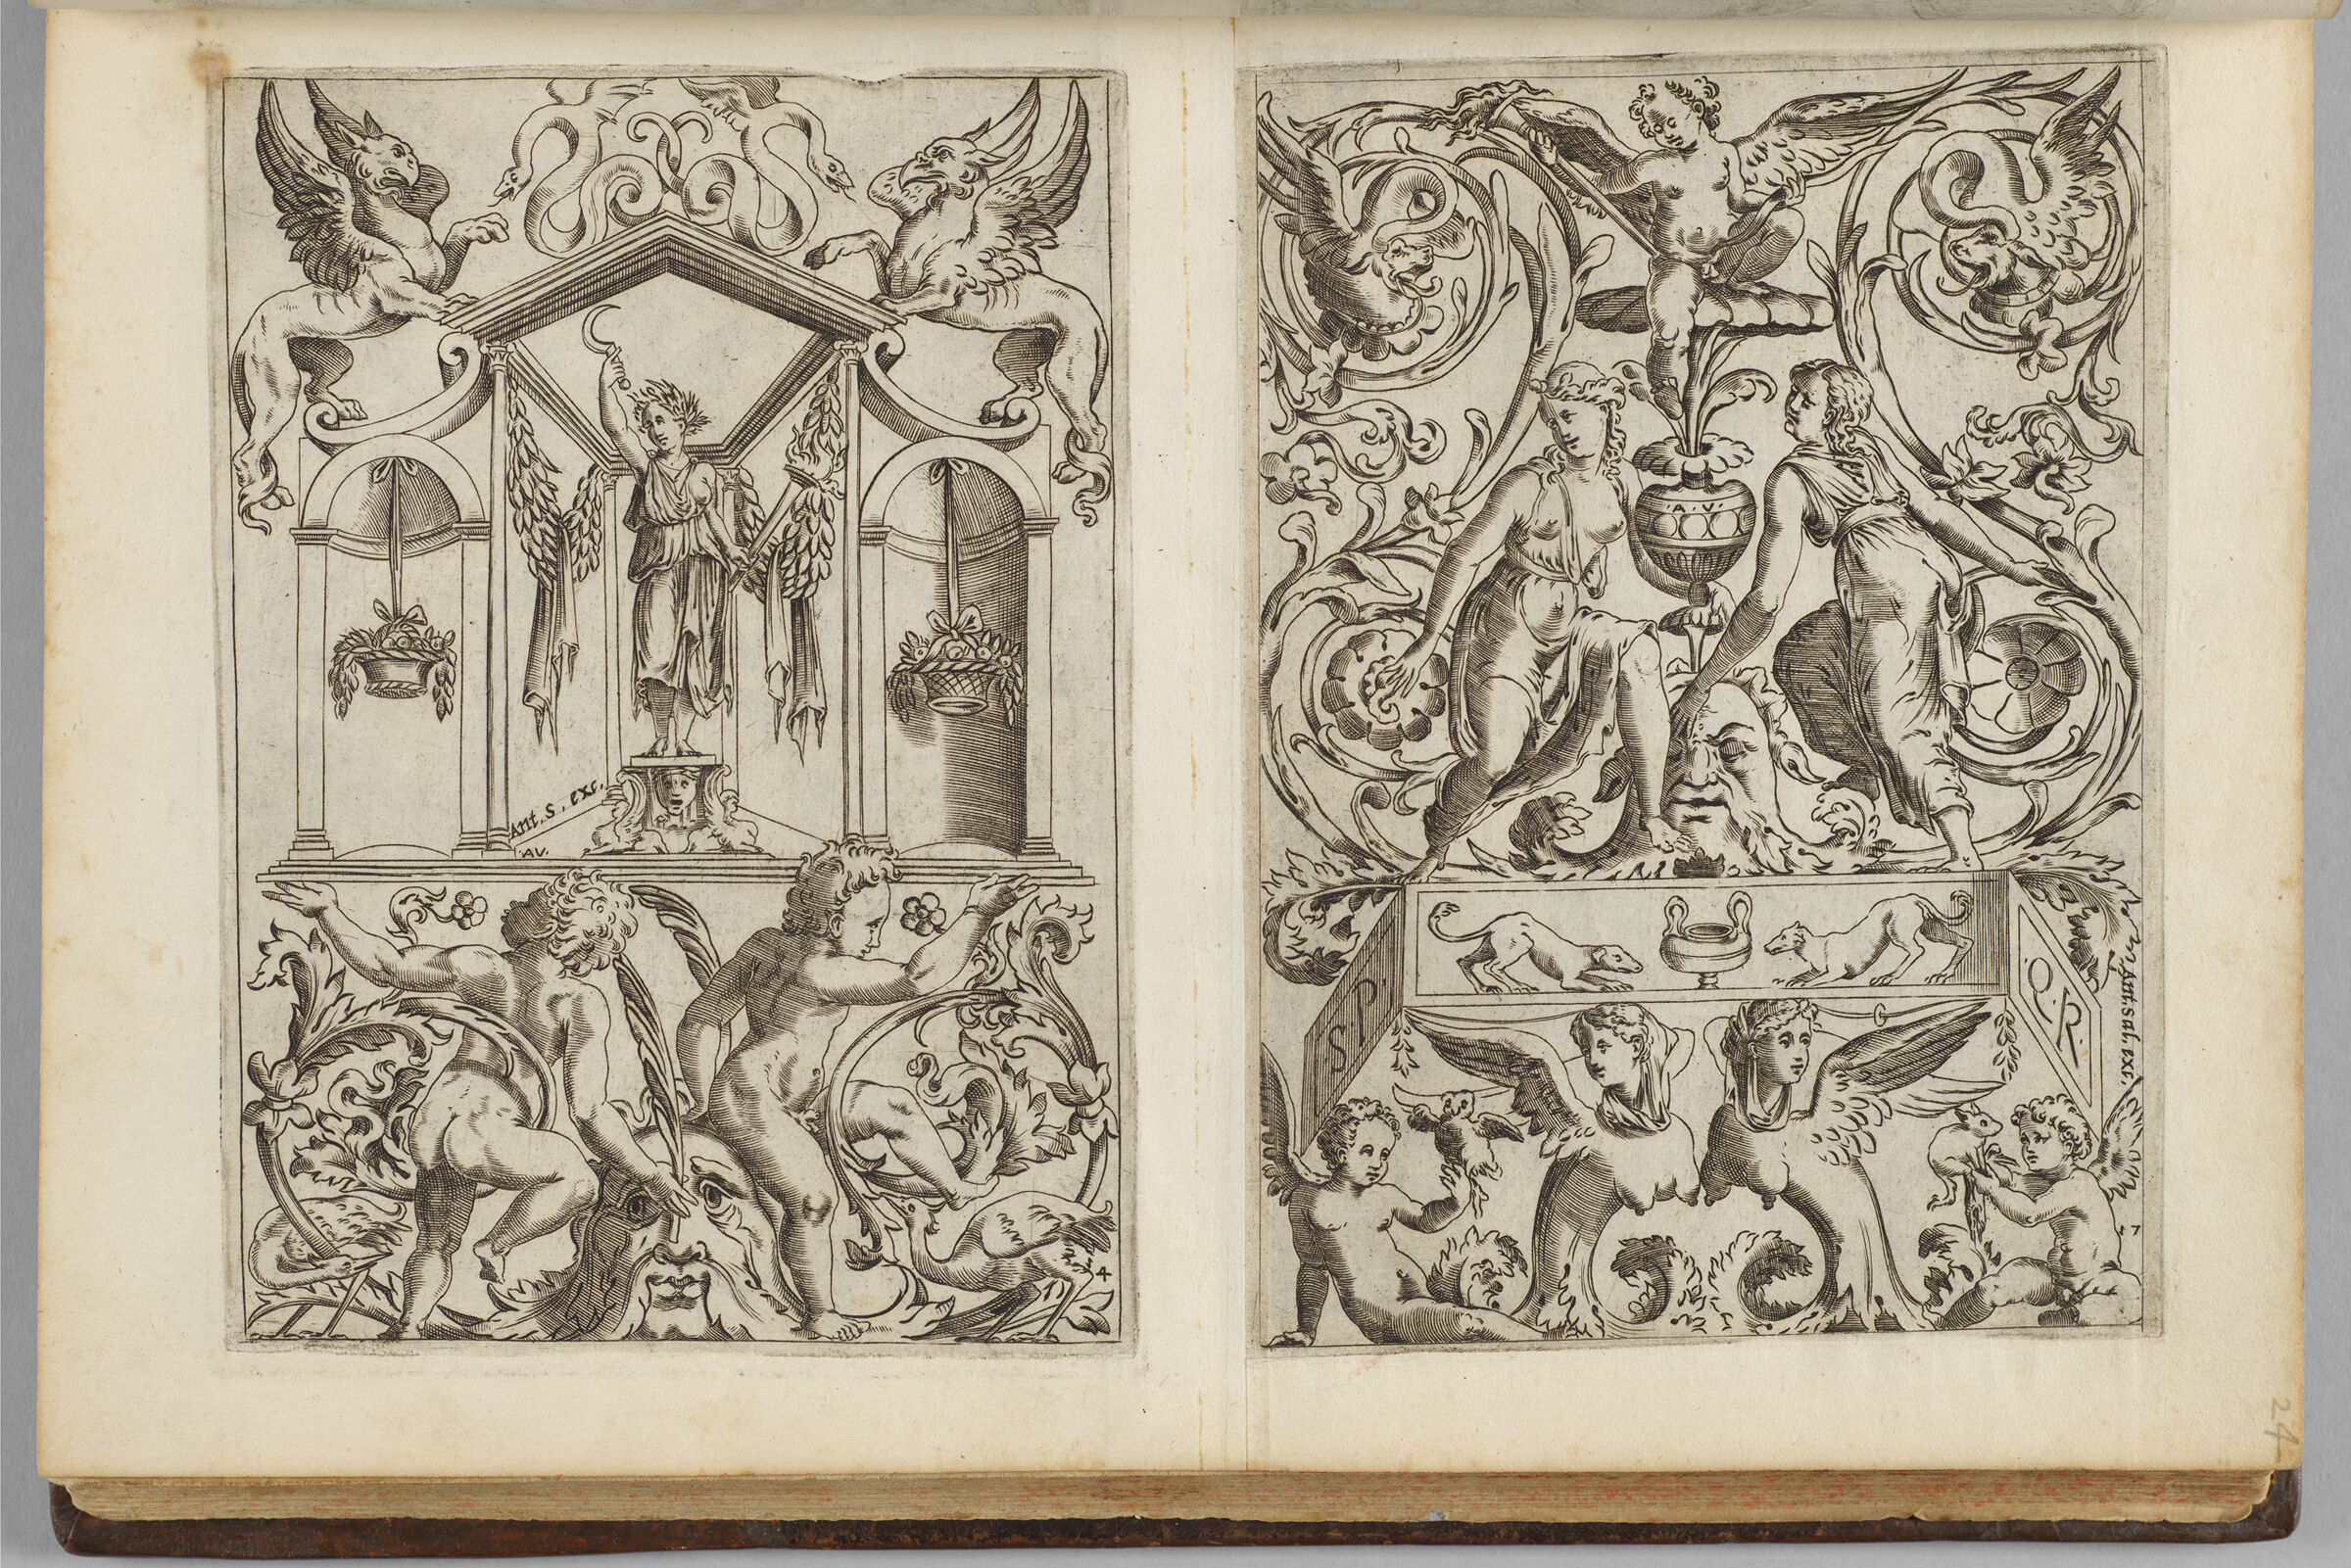 Two Grotesques: The Left With A Temple Of Ceres, The Right With Two Women Above A Panel With Two Dogs, Two Sphinxes Below